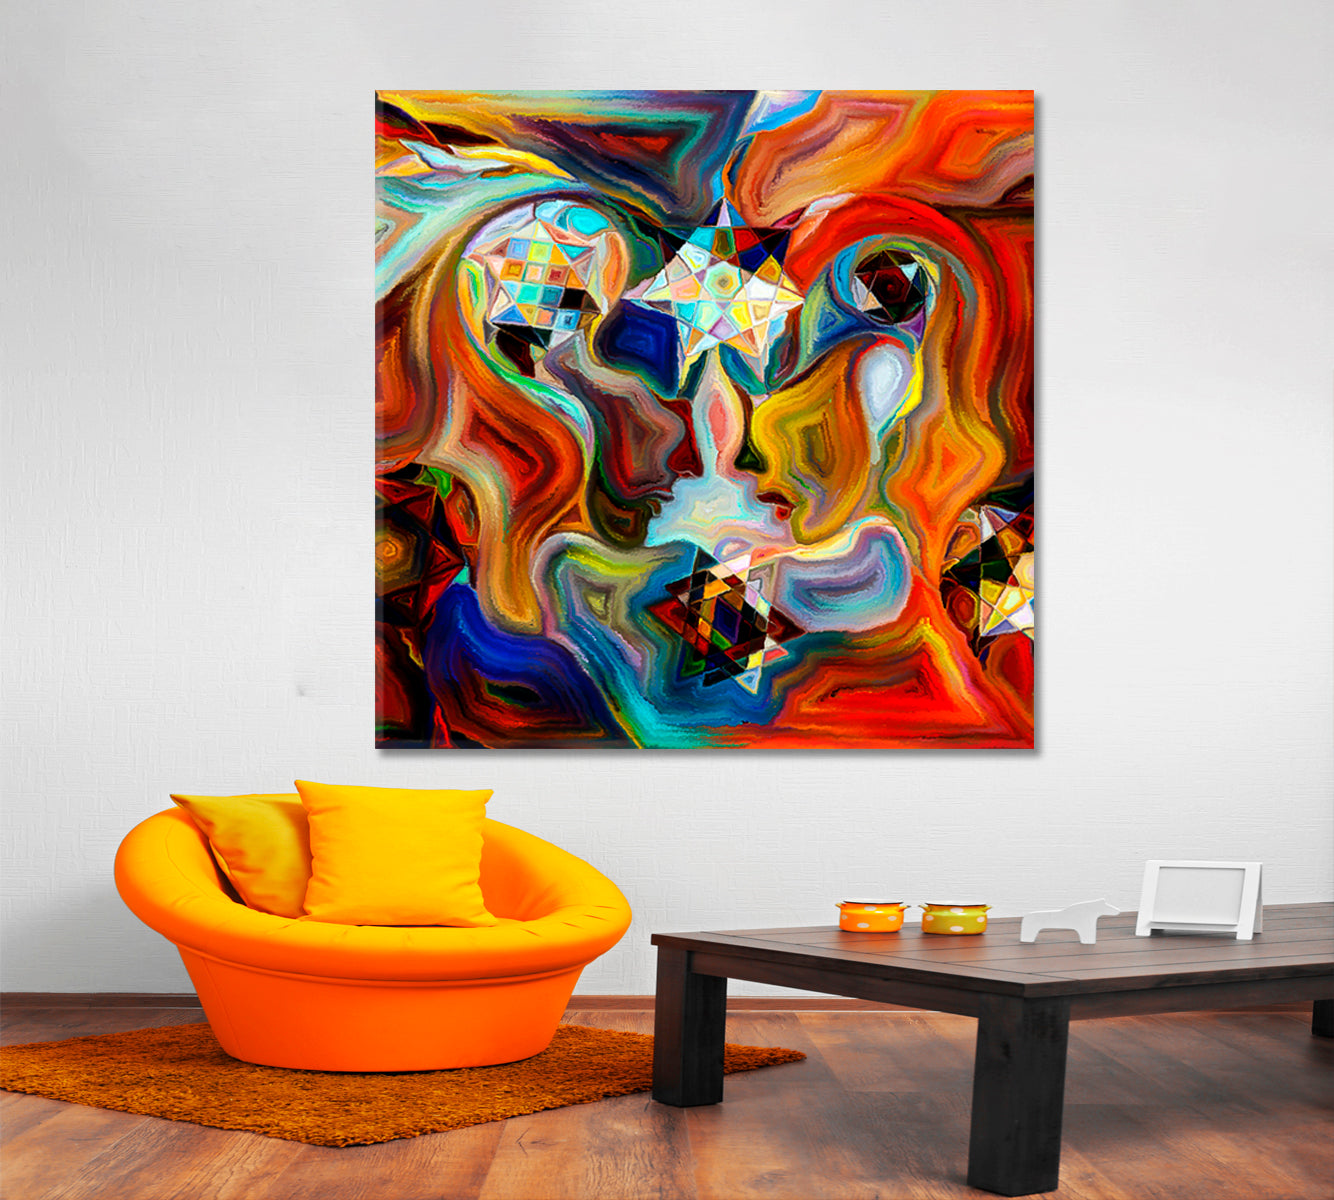 ABSTRACT INTERPLAY Mystic Profiles Colorful Patterns Symbols Vivid Shapes | S Abstract Art Print Artesty 1 Panel 12"x12" 